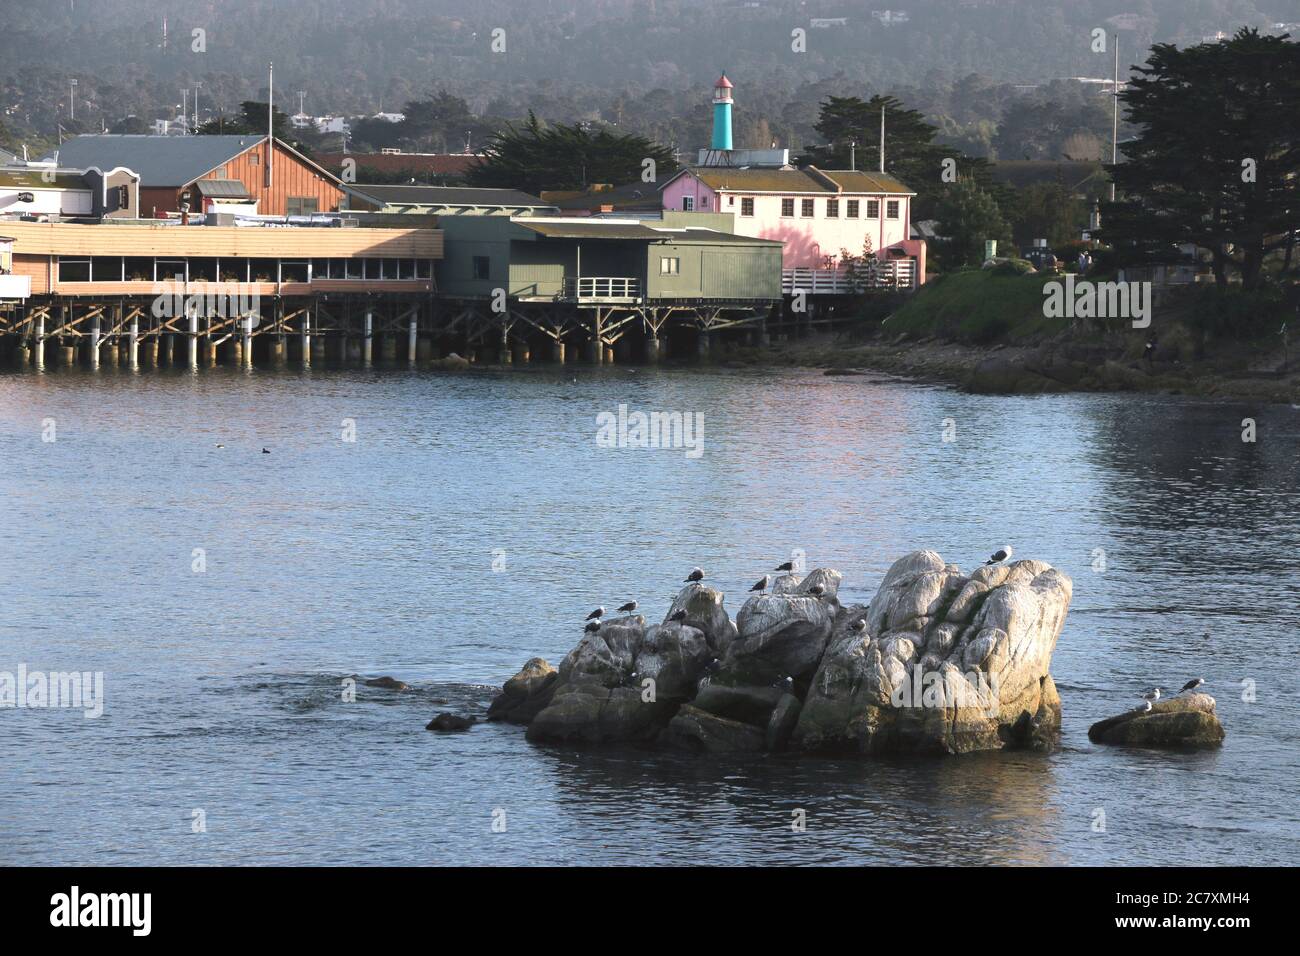 Sea gulls gathered on a rock in the foreground of a view of Fishermans Wharf, Monterey CA. Stock Photo